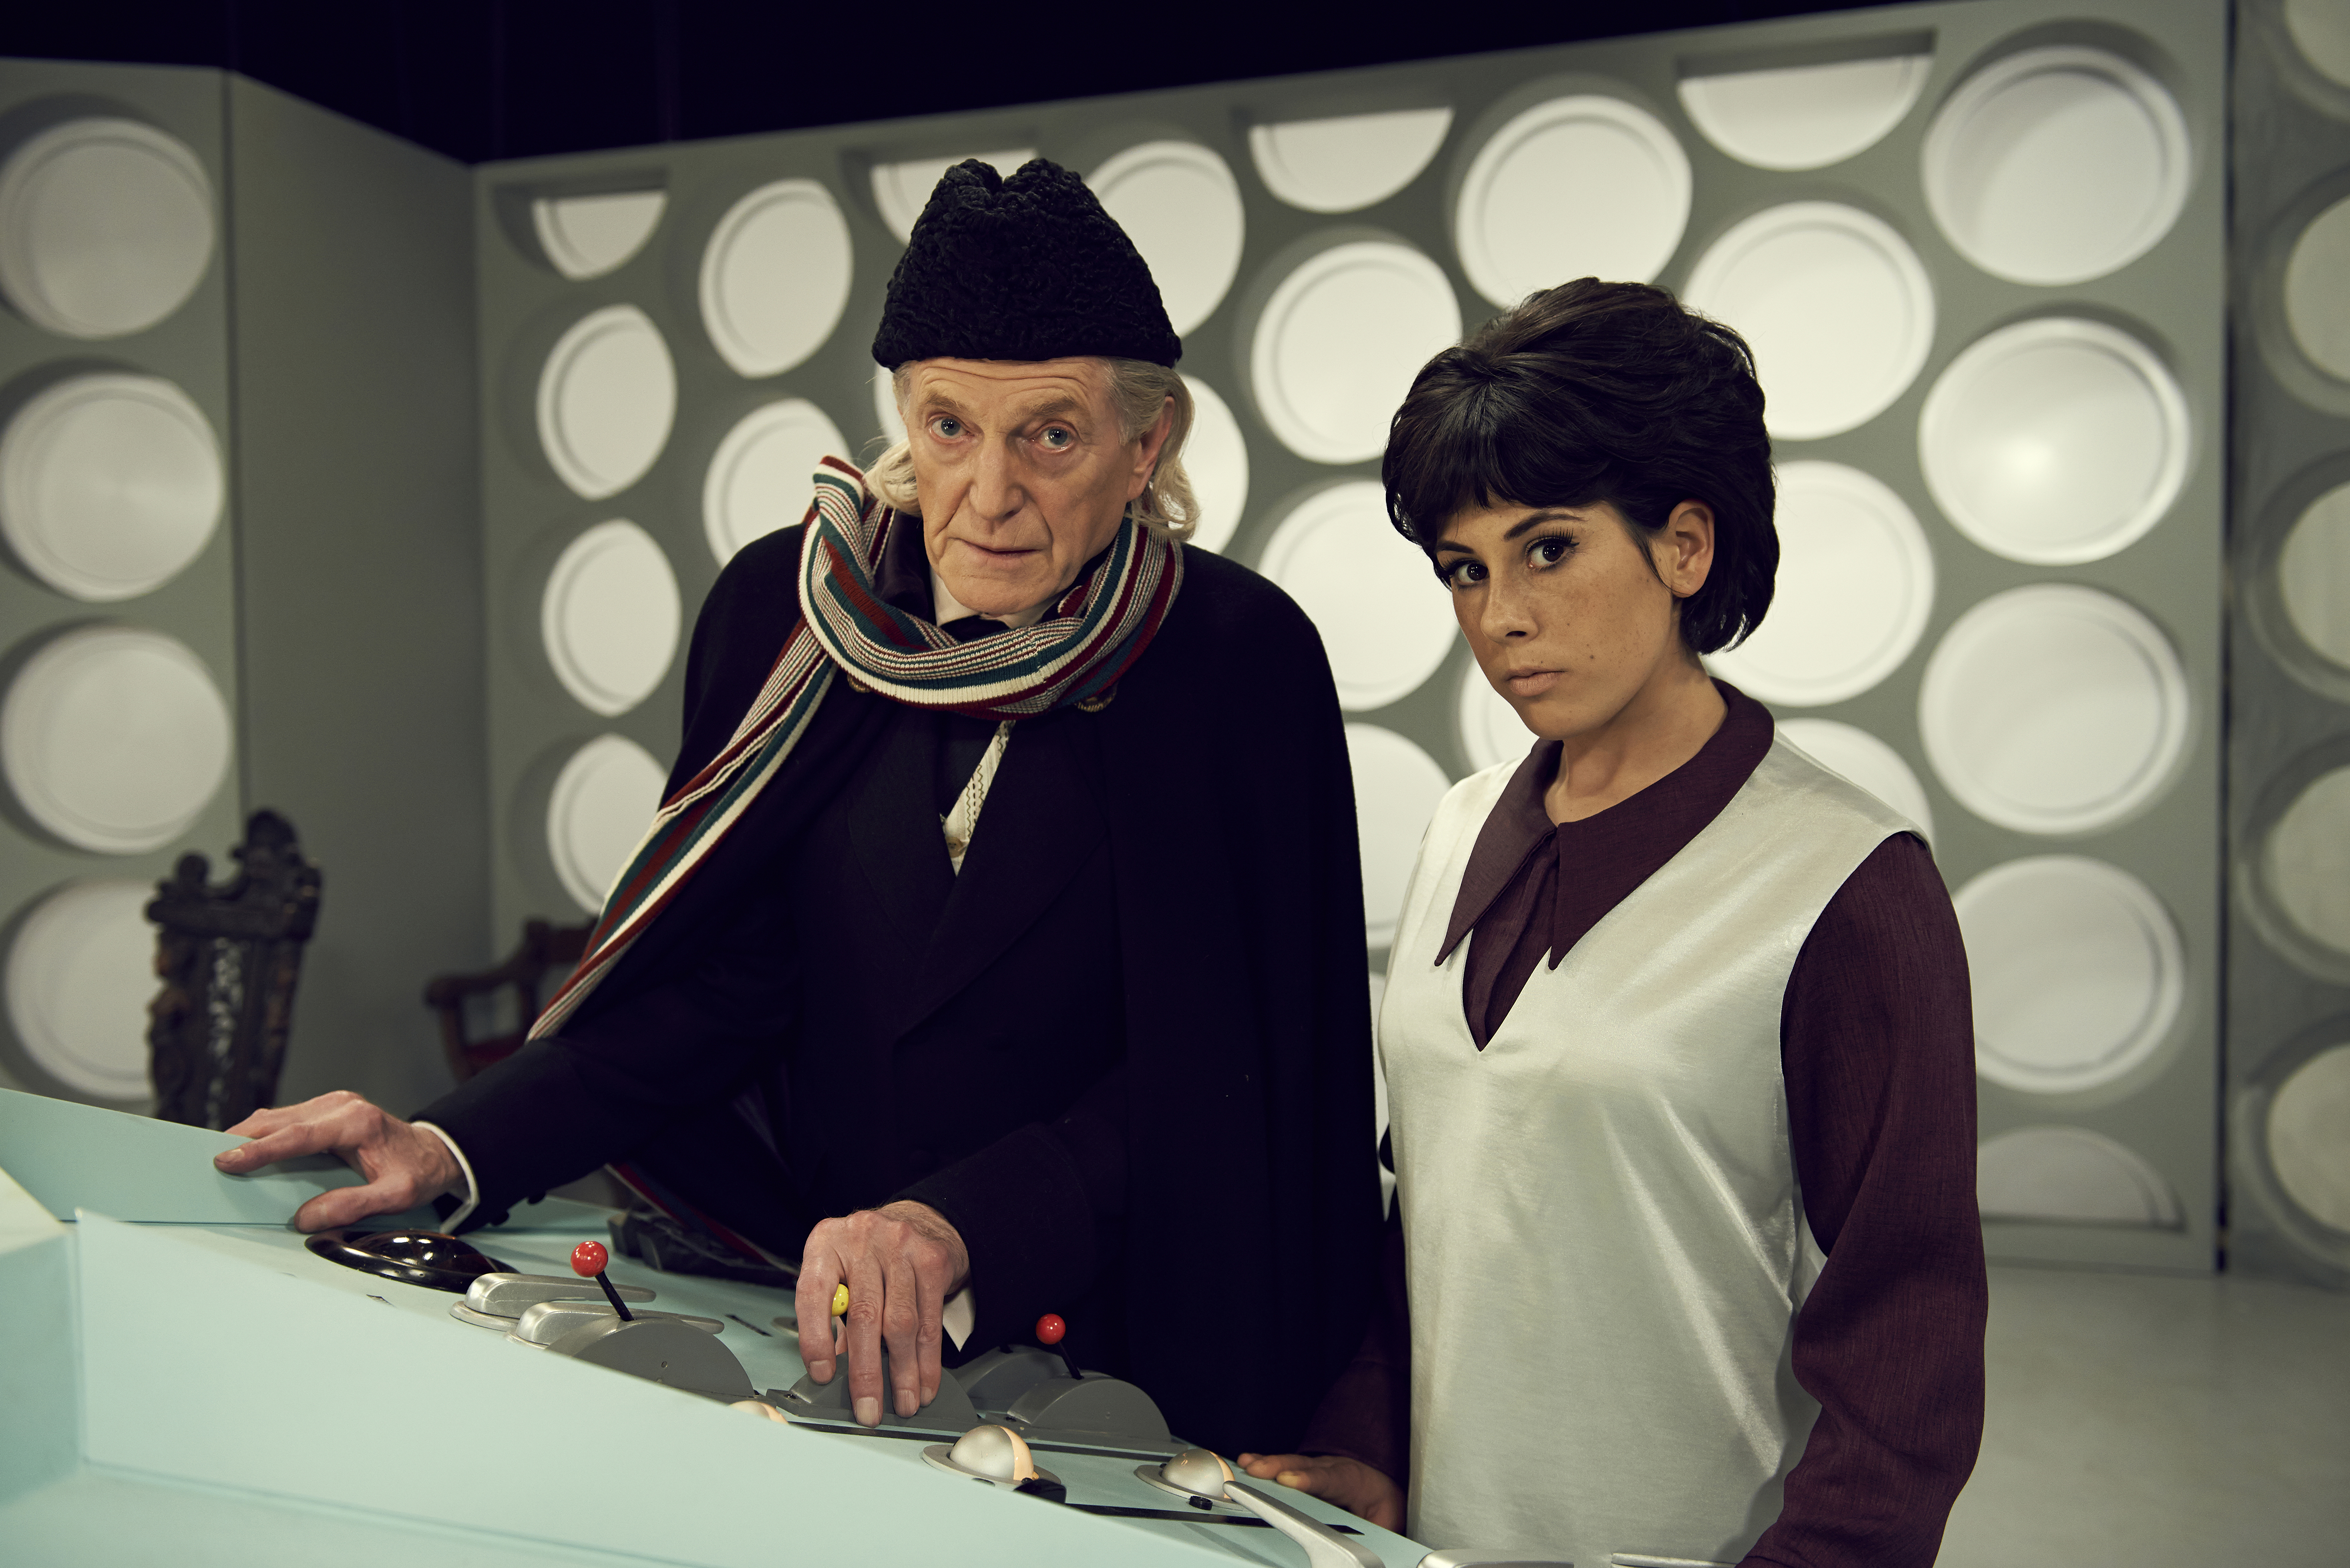 David Bradley and Claudia Grant recreat the early days of "Doctor Who" (Photo: HAL SHINNIE, © BBC 2013)